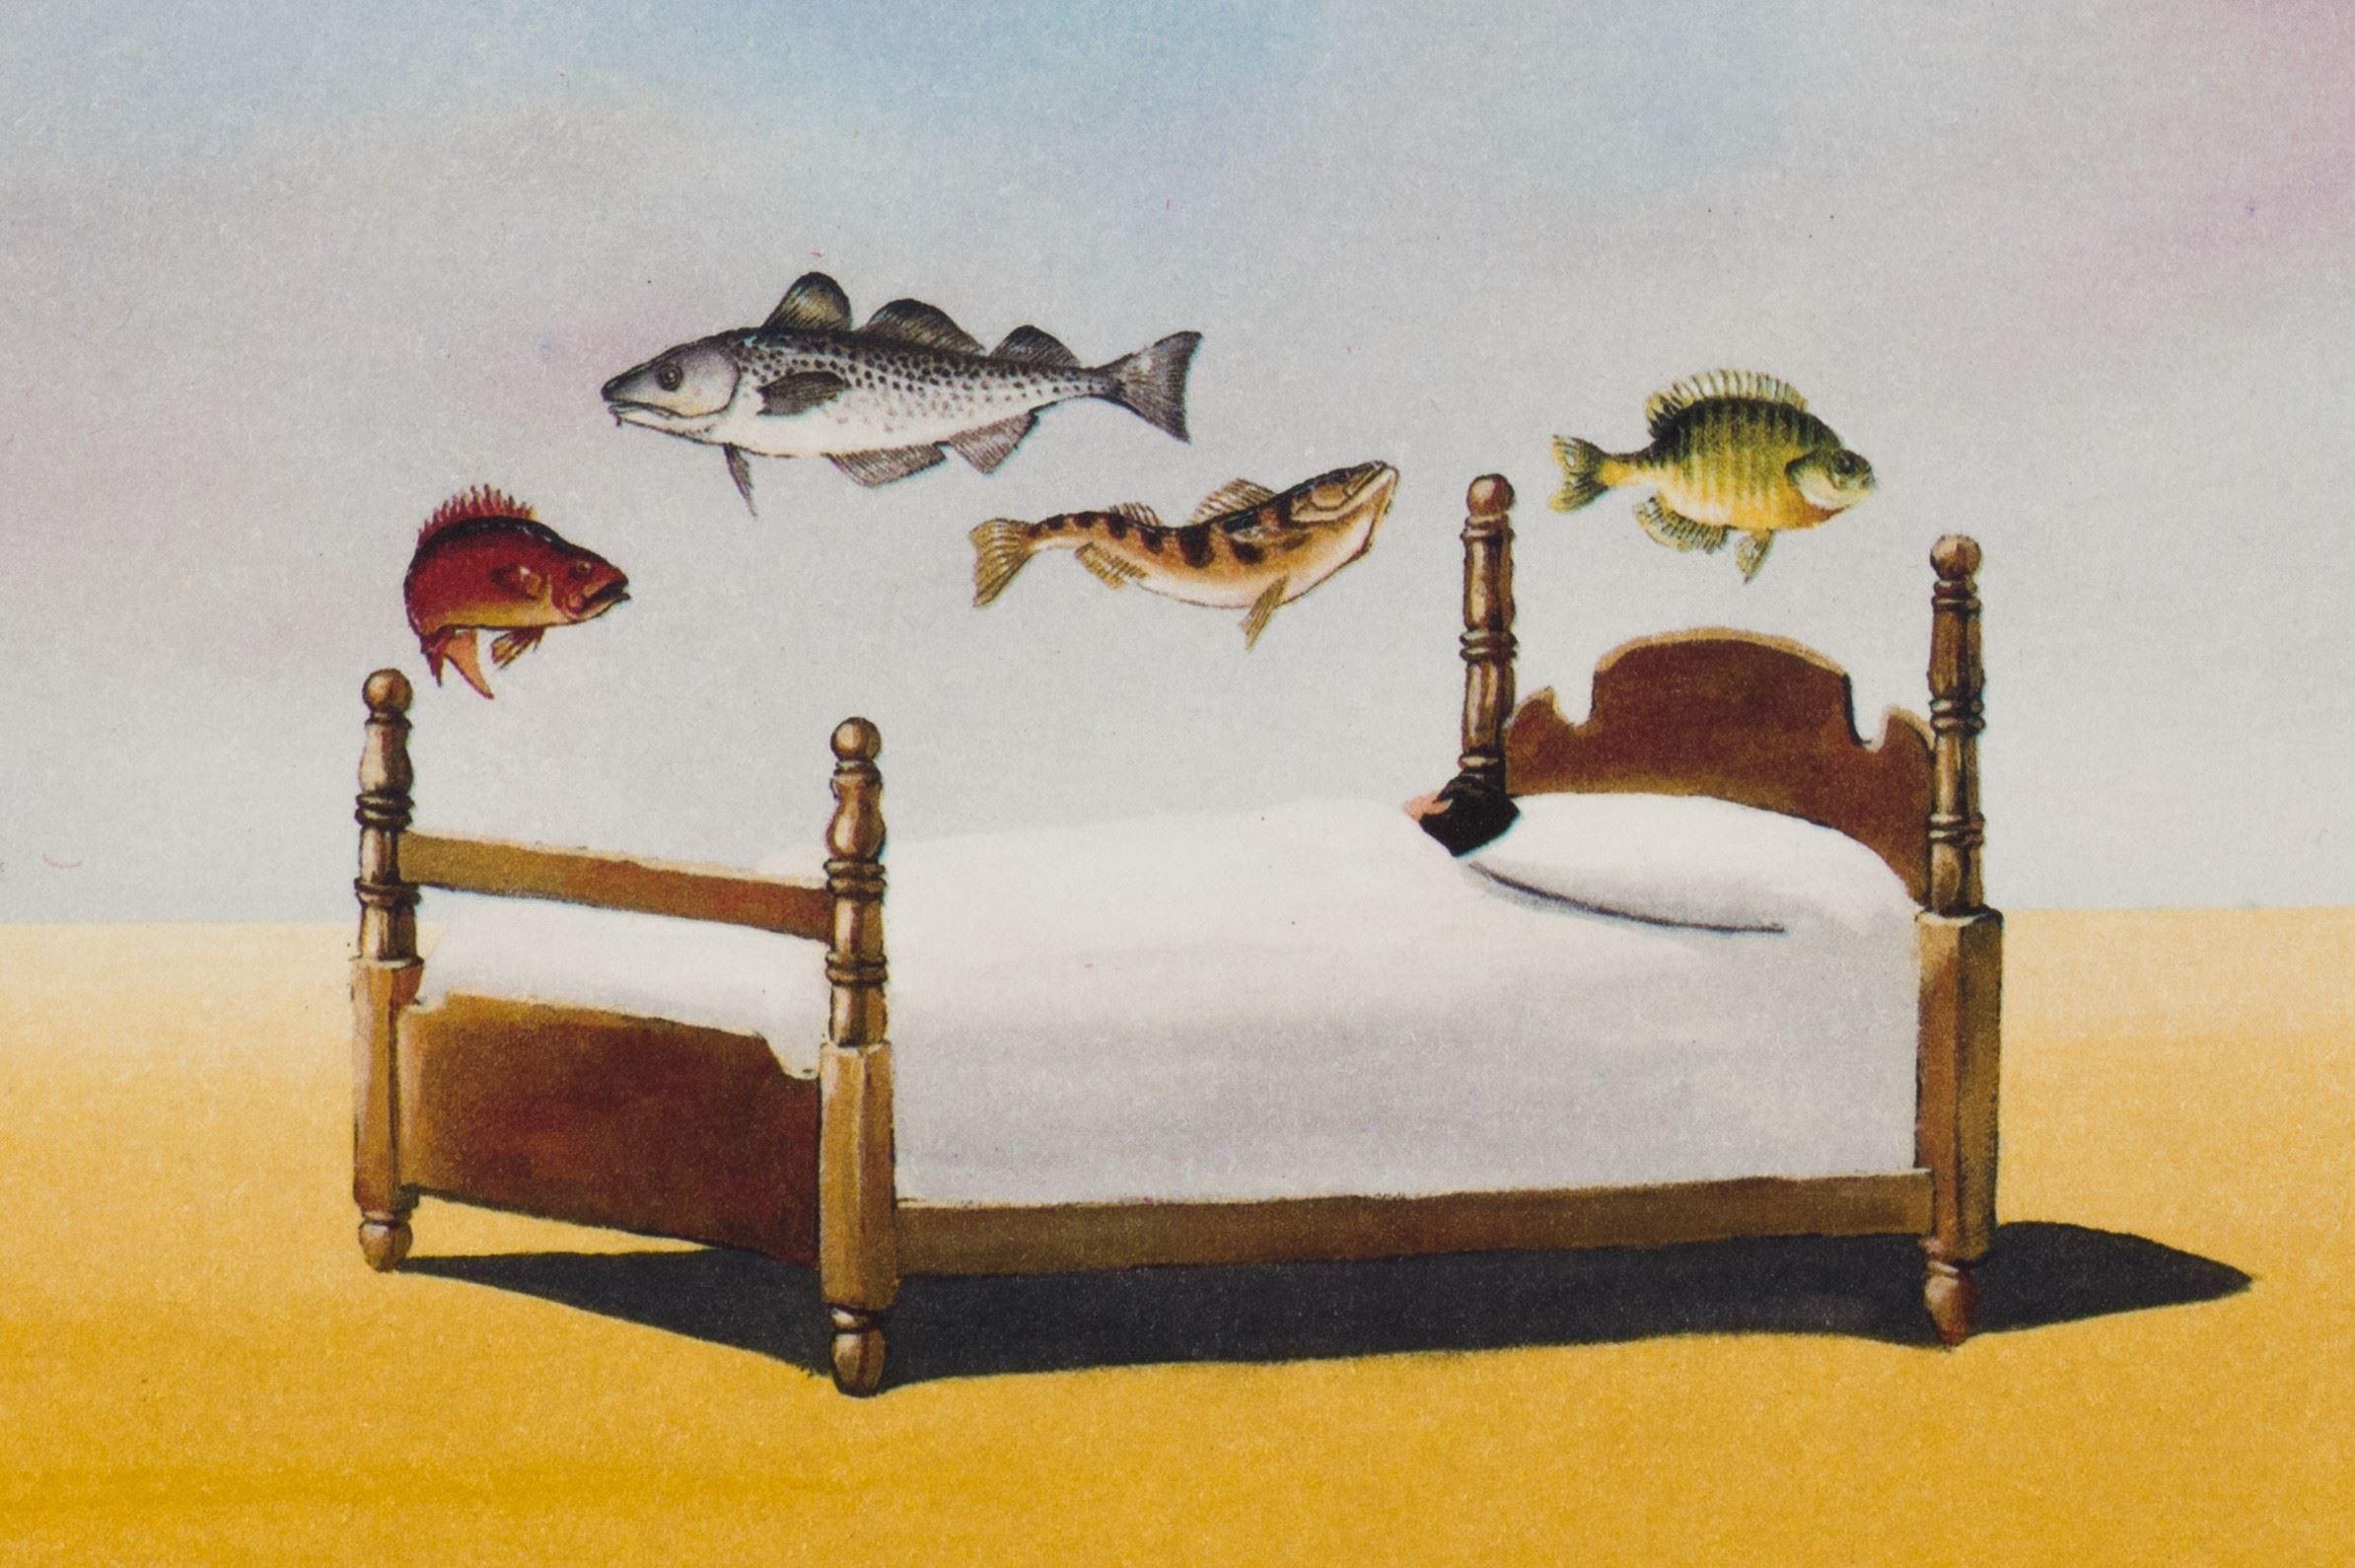 Sleeping With the Fishes is a lithograph on paper, 9.25 x 9 inches  image size, and initialed 'BD' lower right. From the edition of 395, numbered 171/275 (there were also 100 Roman and 20 AP). Framed in a contemporary, silver-tone frame.

Robert